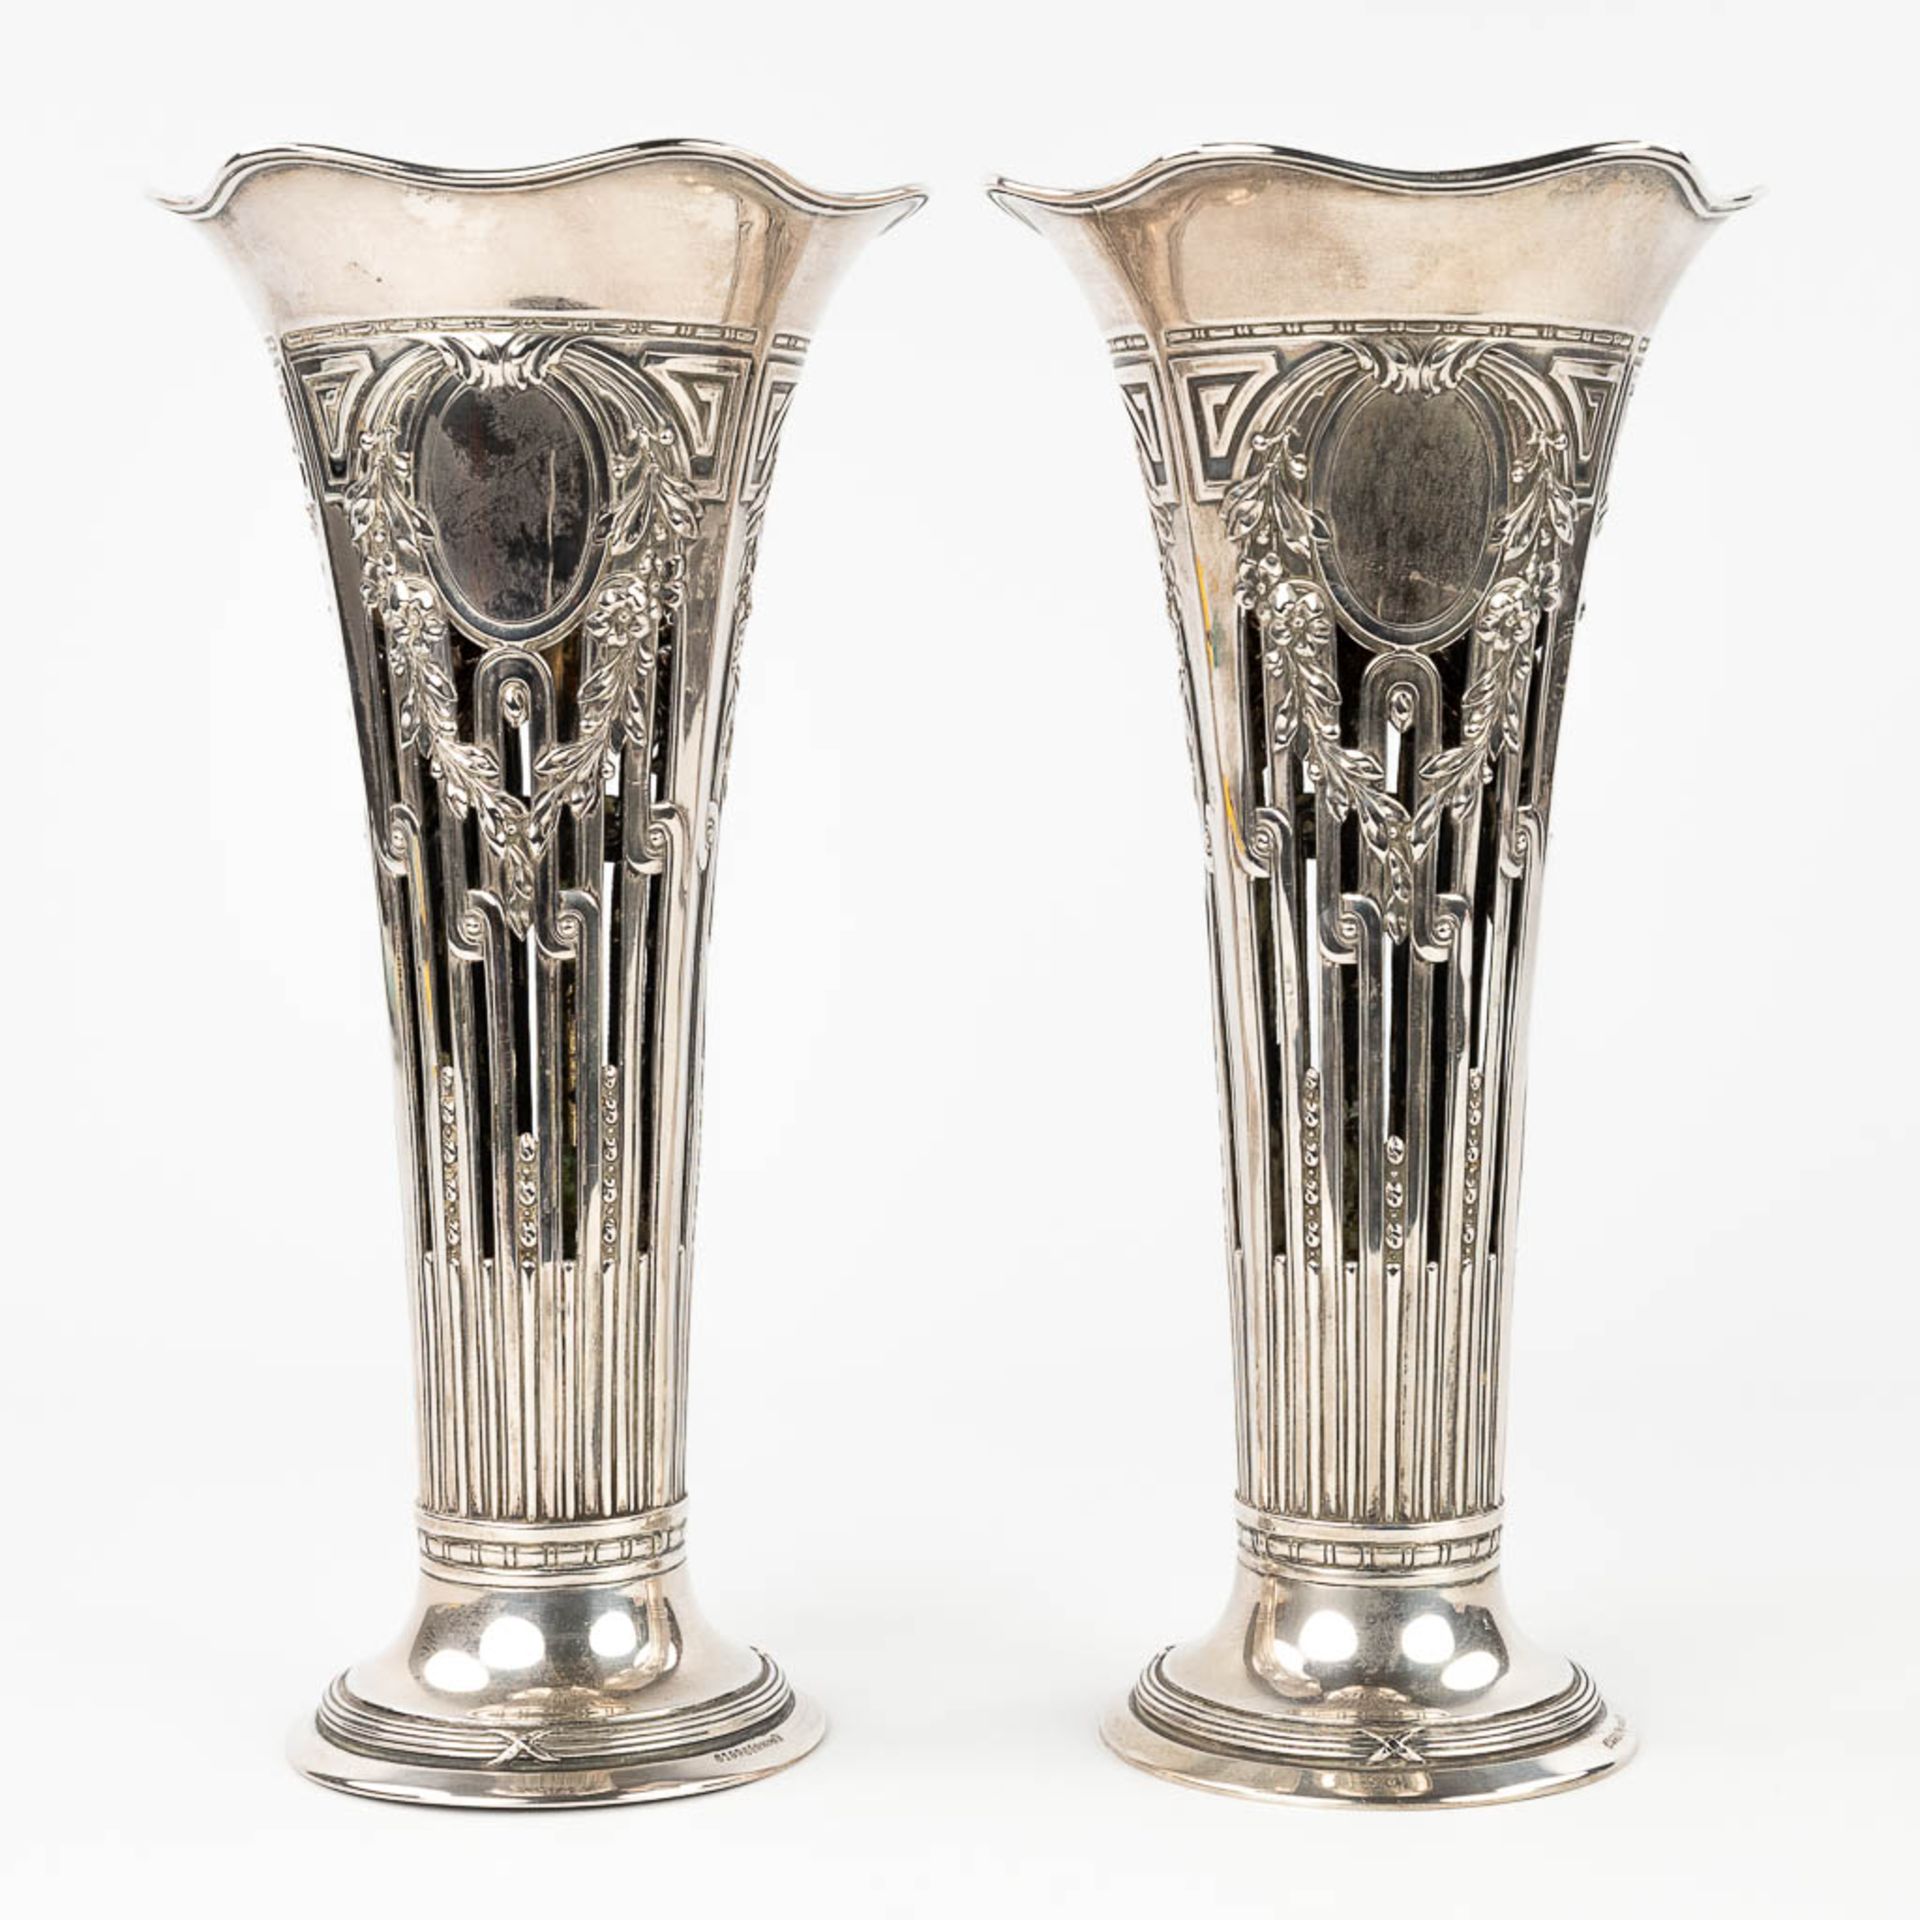 A pair of vases made of silver and marked 800. Made in Germany. 693g. 20th C. (H:31 x D:15,5 cm) - Image 7 of 14